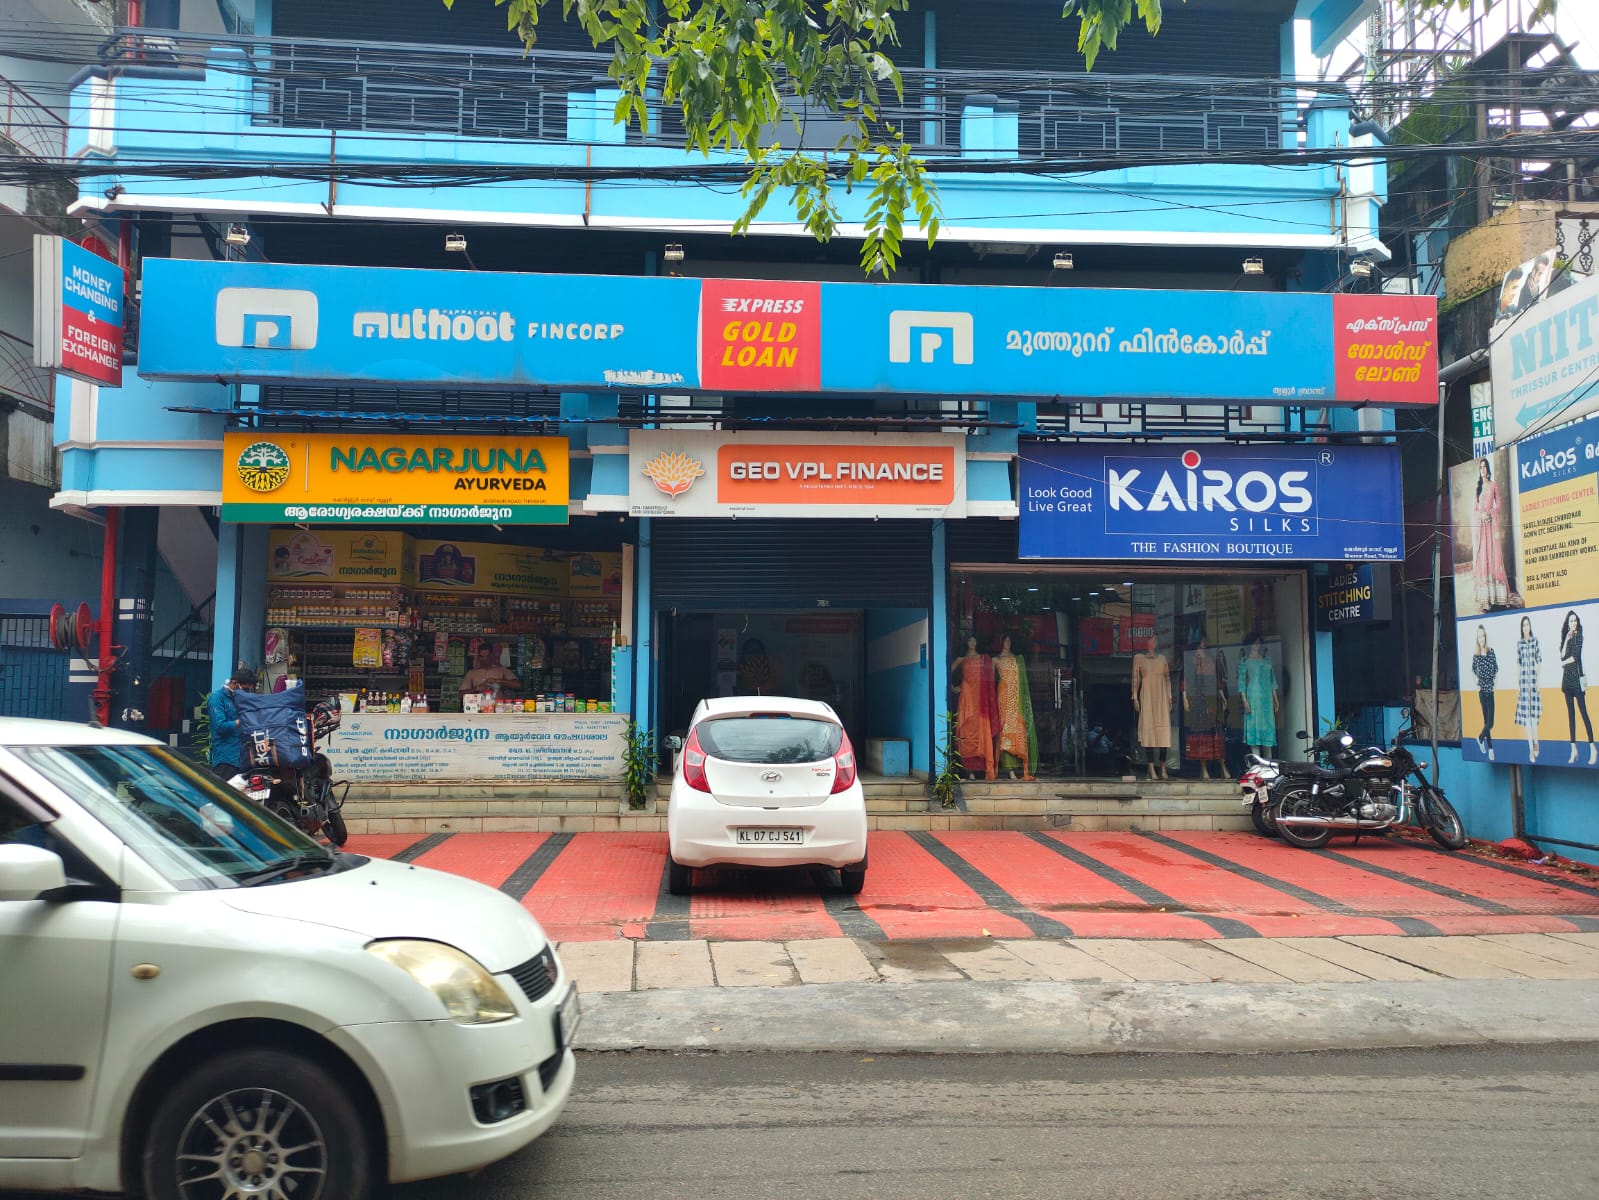 Photos and Videos of Muthoot Fincorp Gold Loan in Thiruvambadi, Thrissur